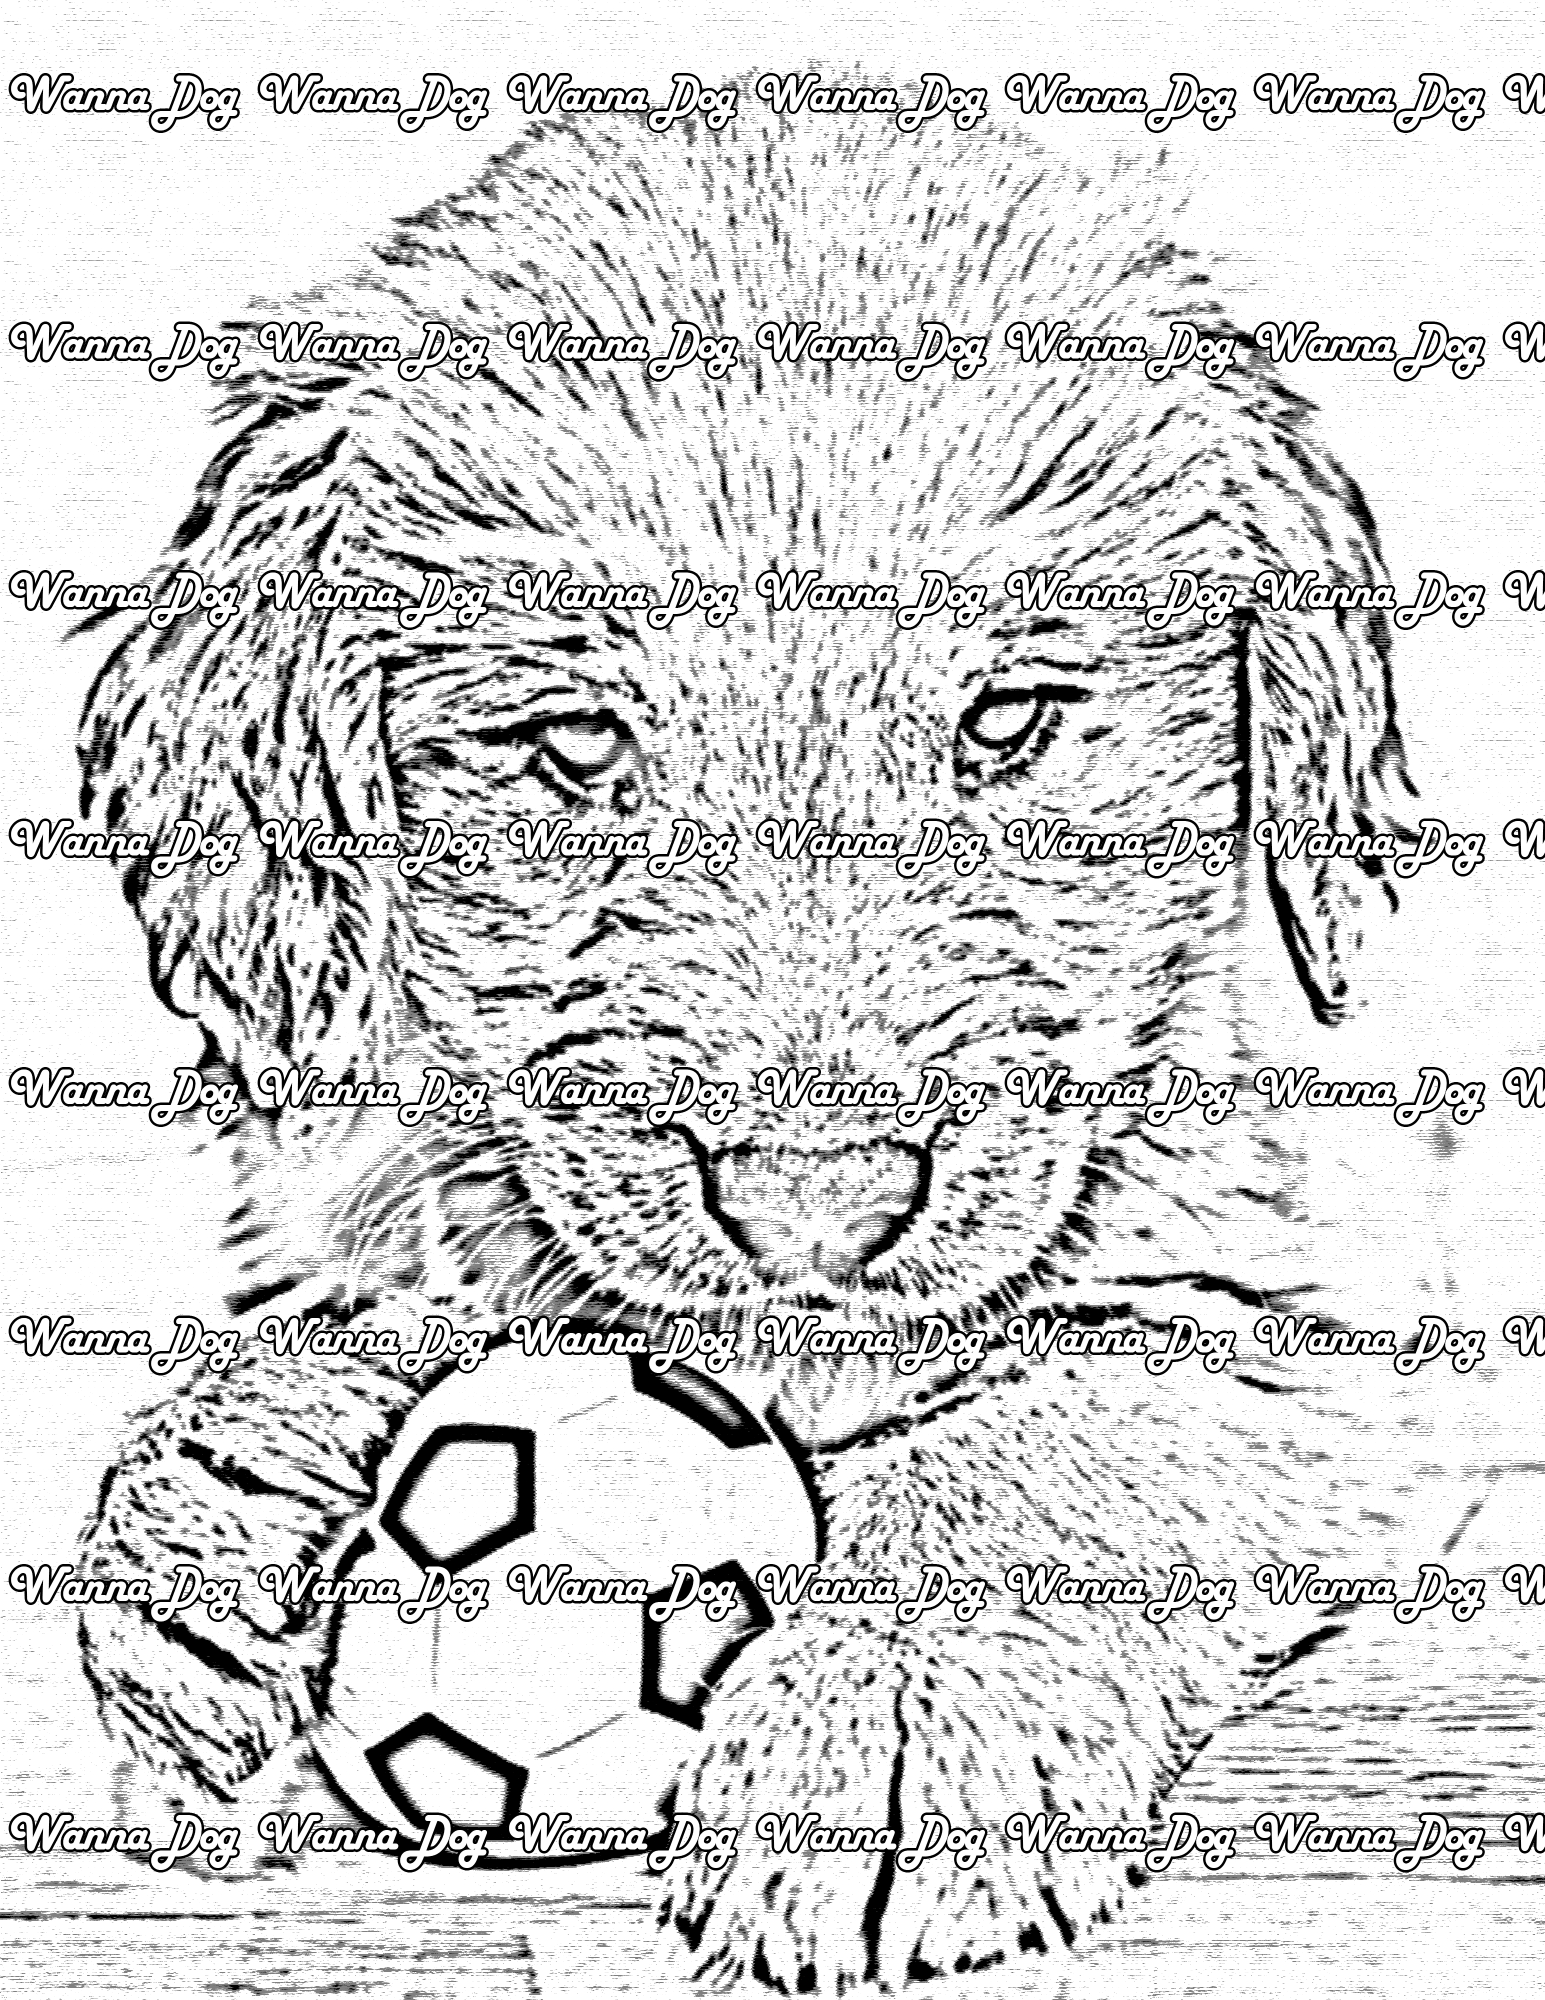 Golden Retriever Puppy Coloring Page of a Golden Retriever Puppy with a soccer ball